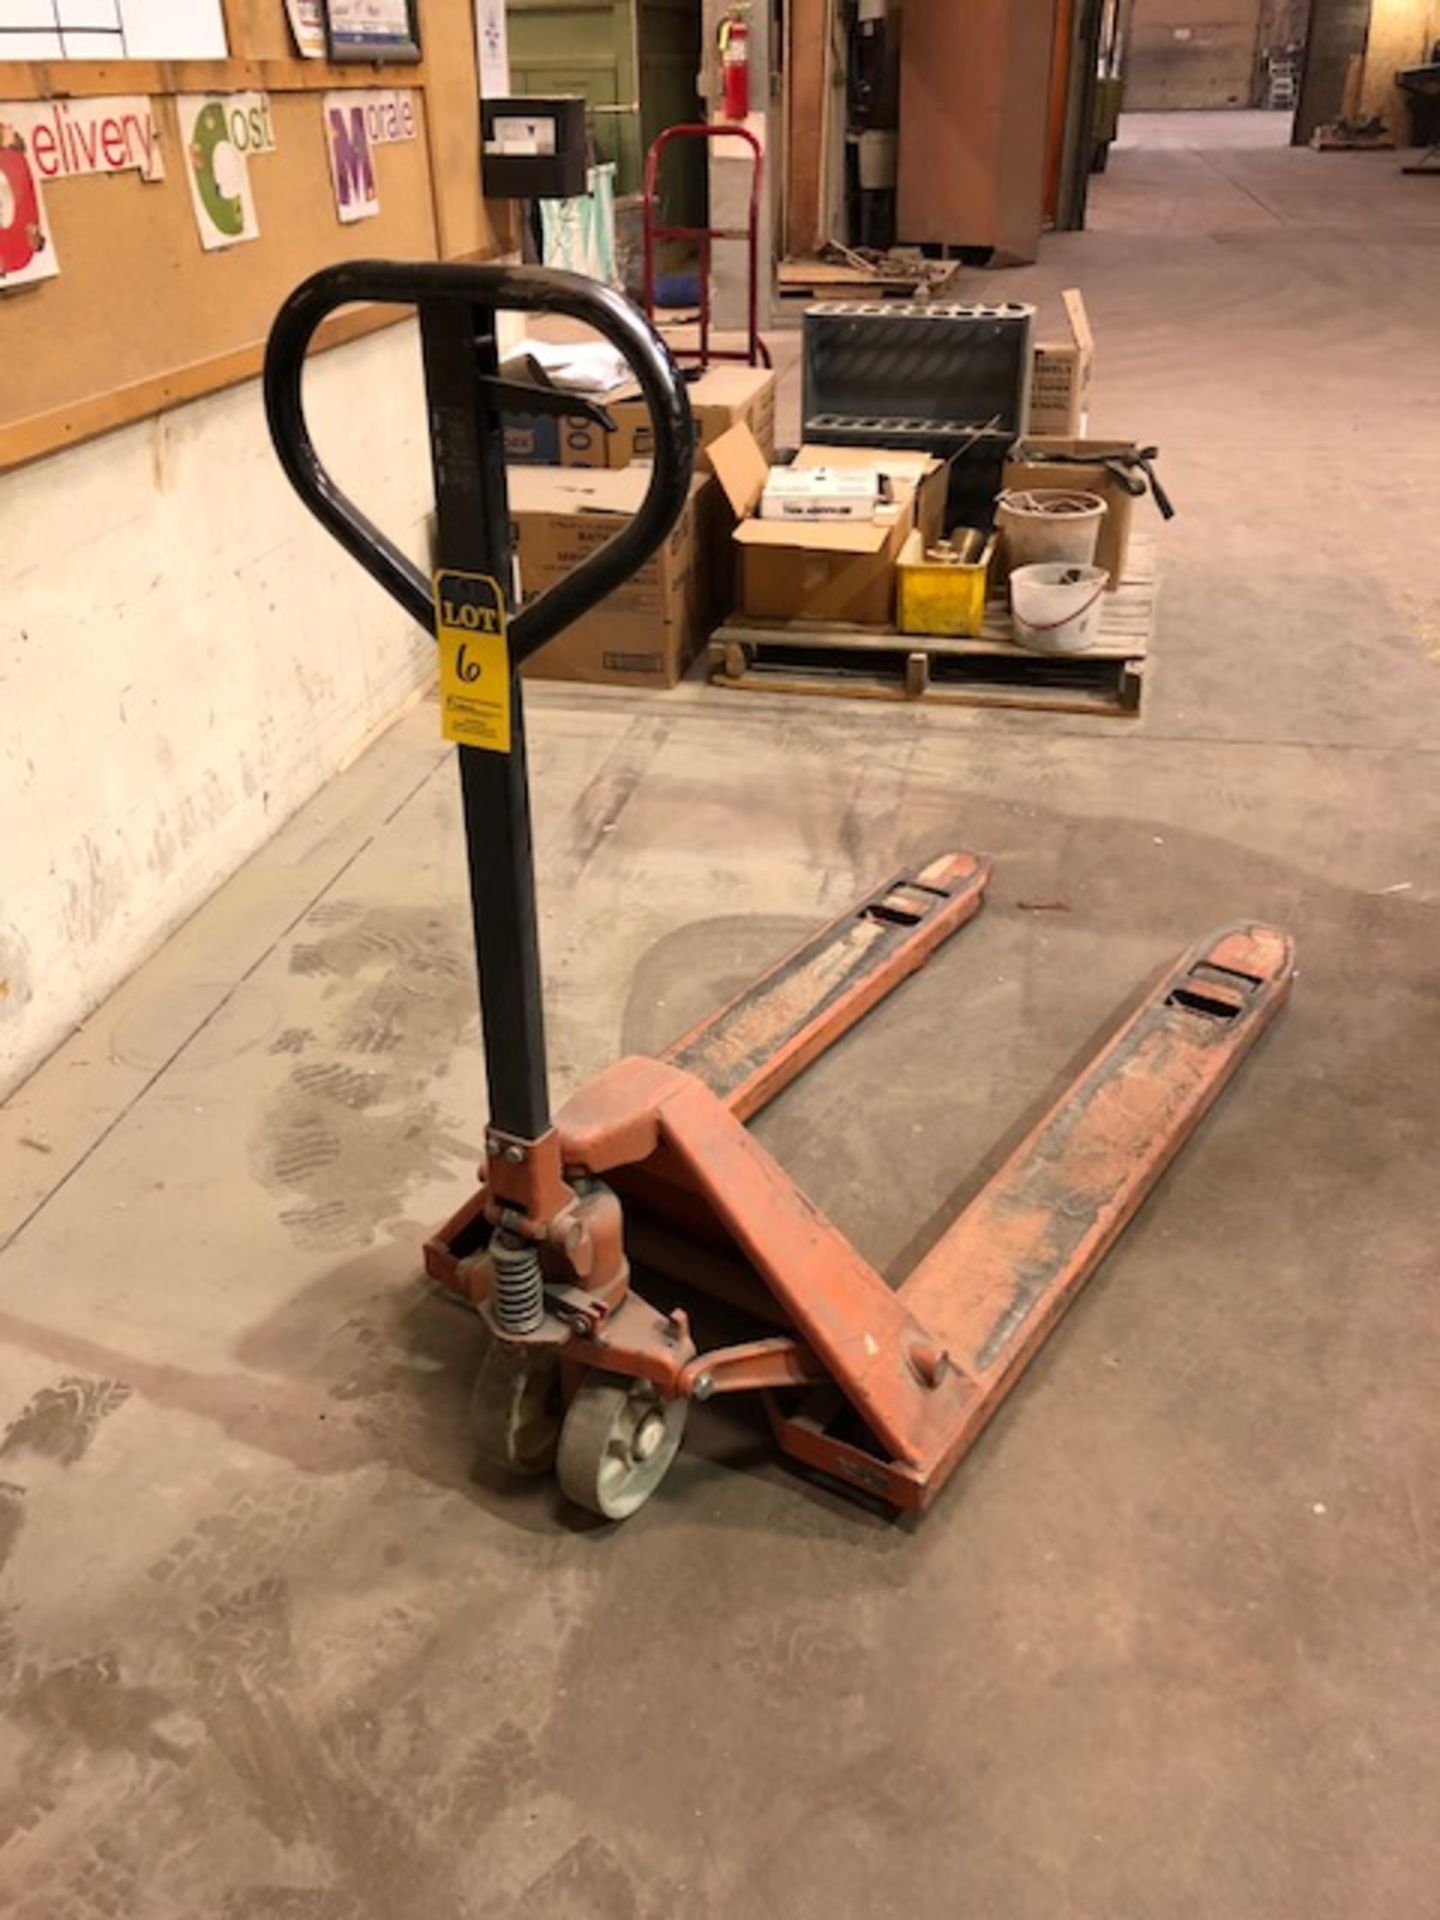 Pallet jack - removal available October 26, 2018